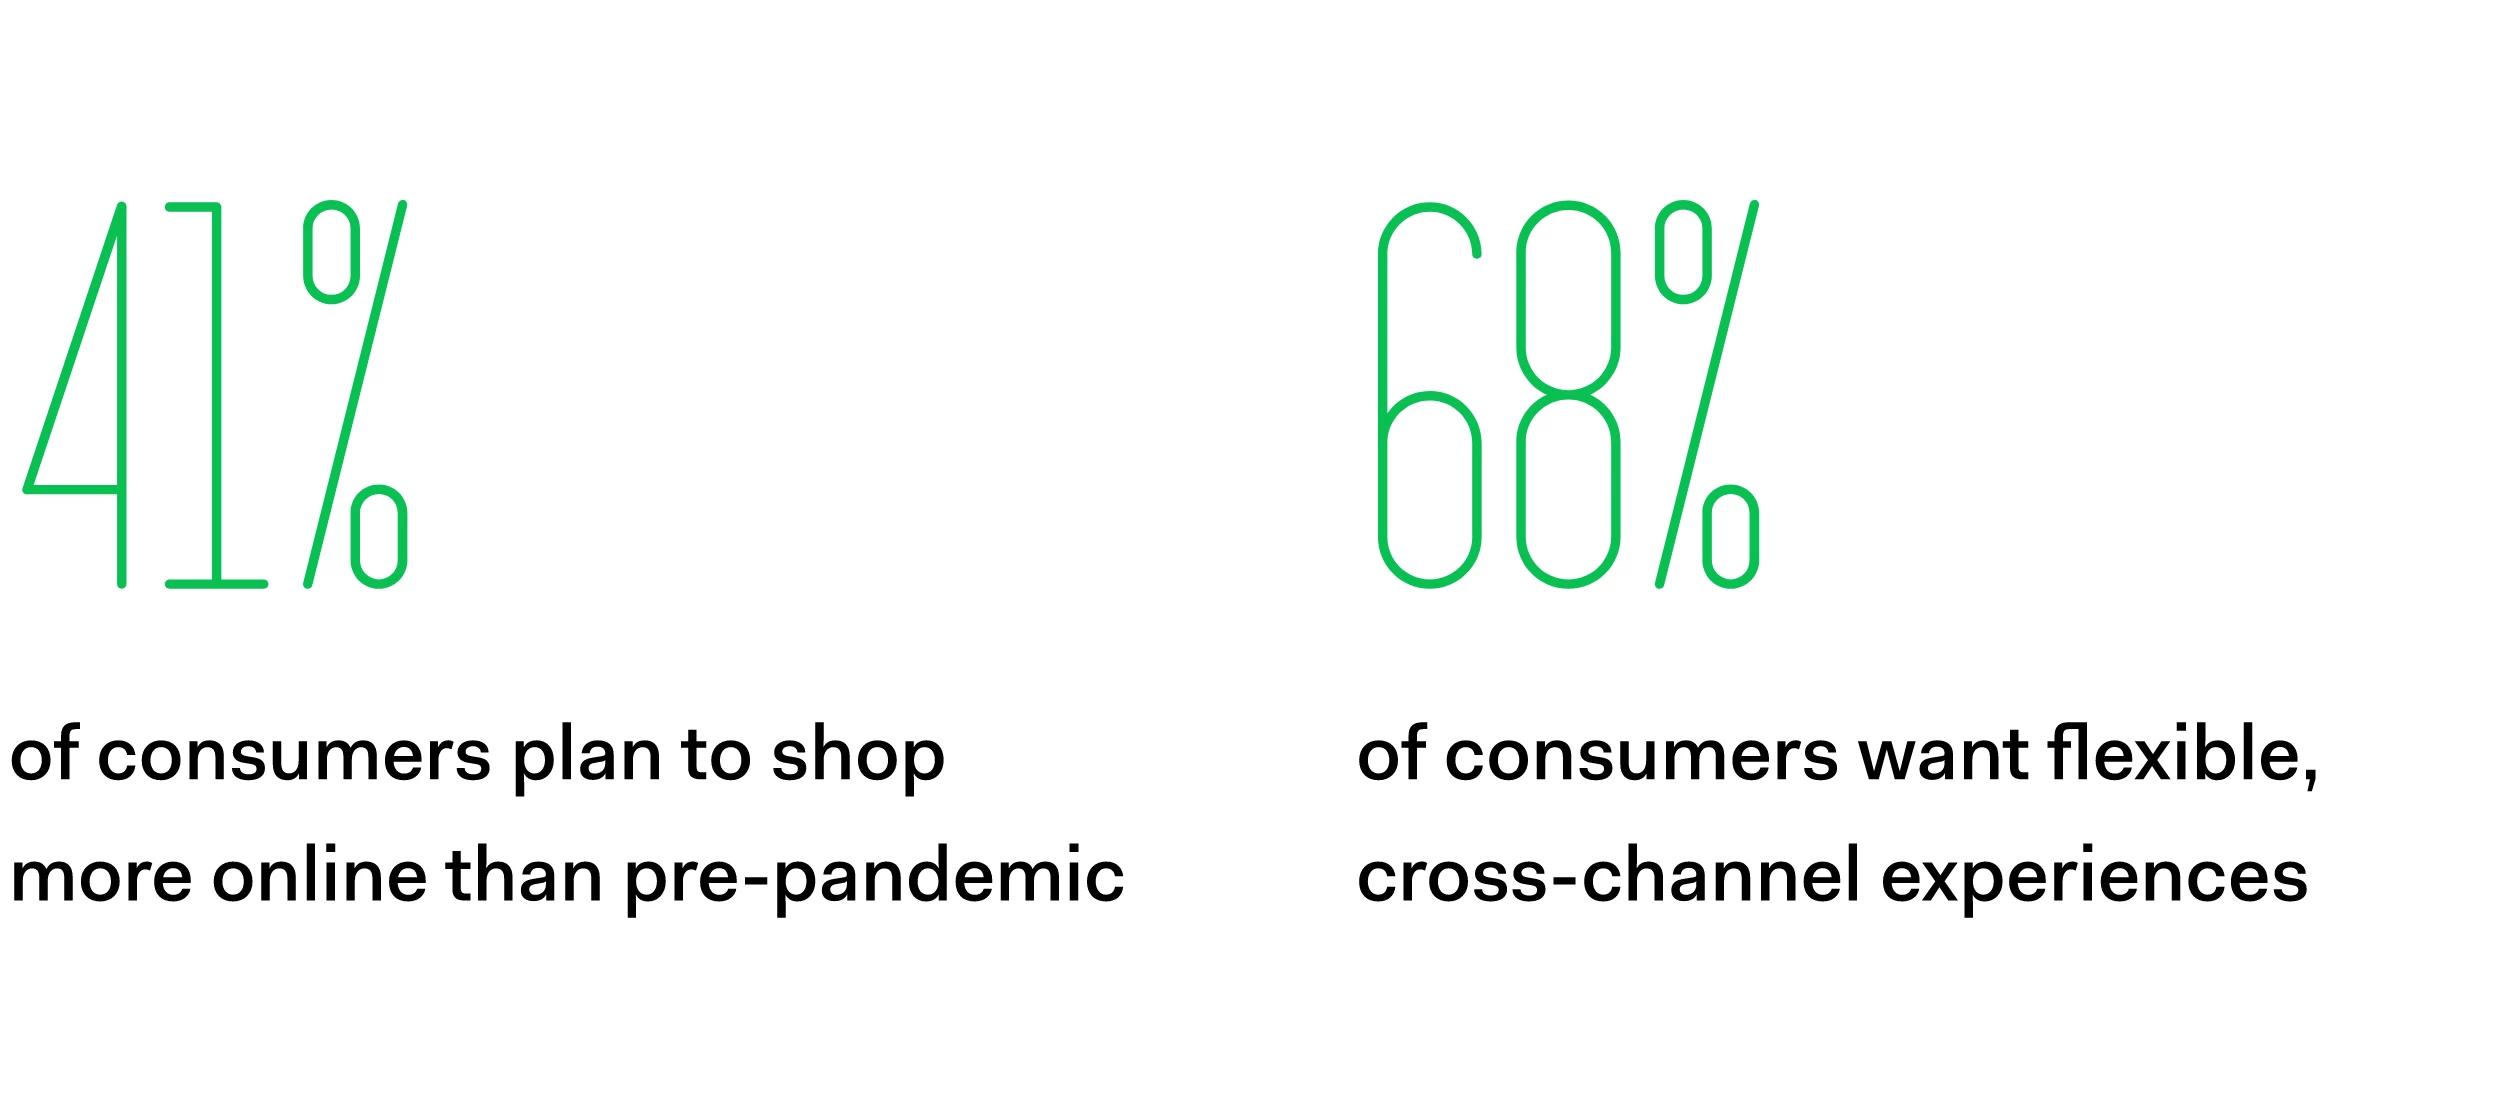 Data points showing growth in ecommerce